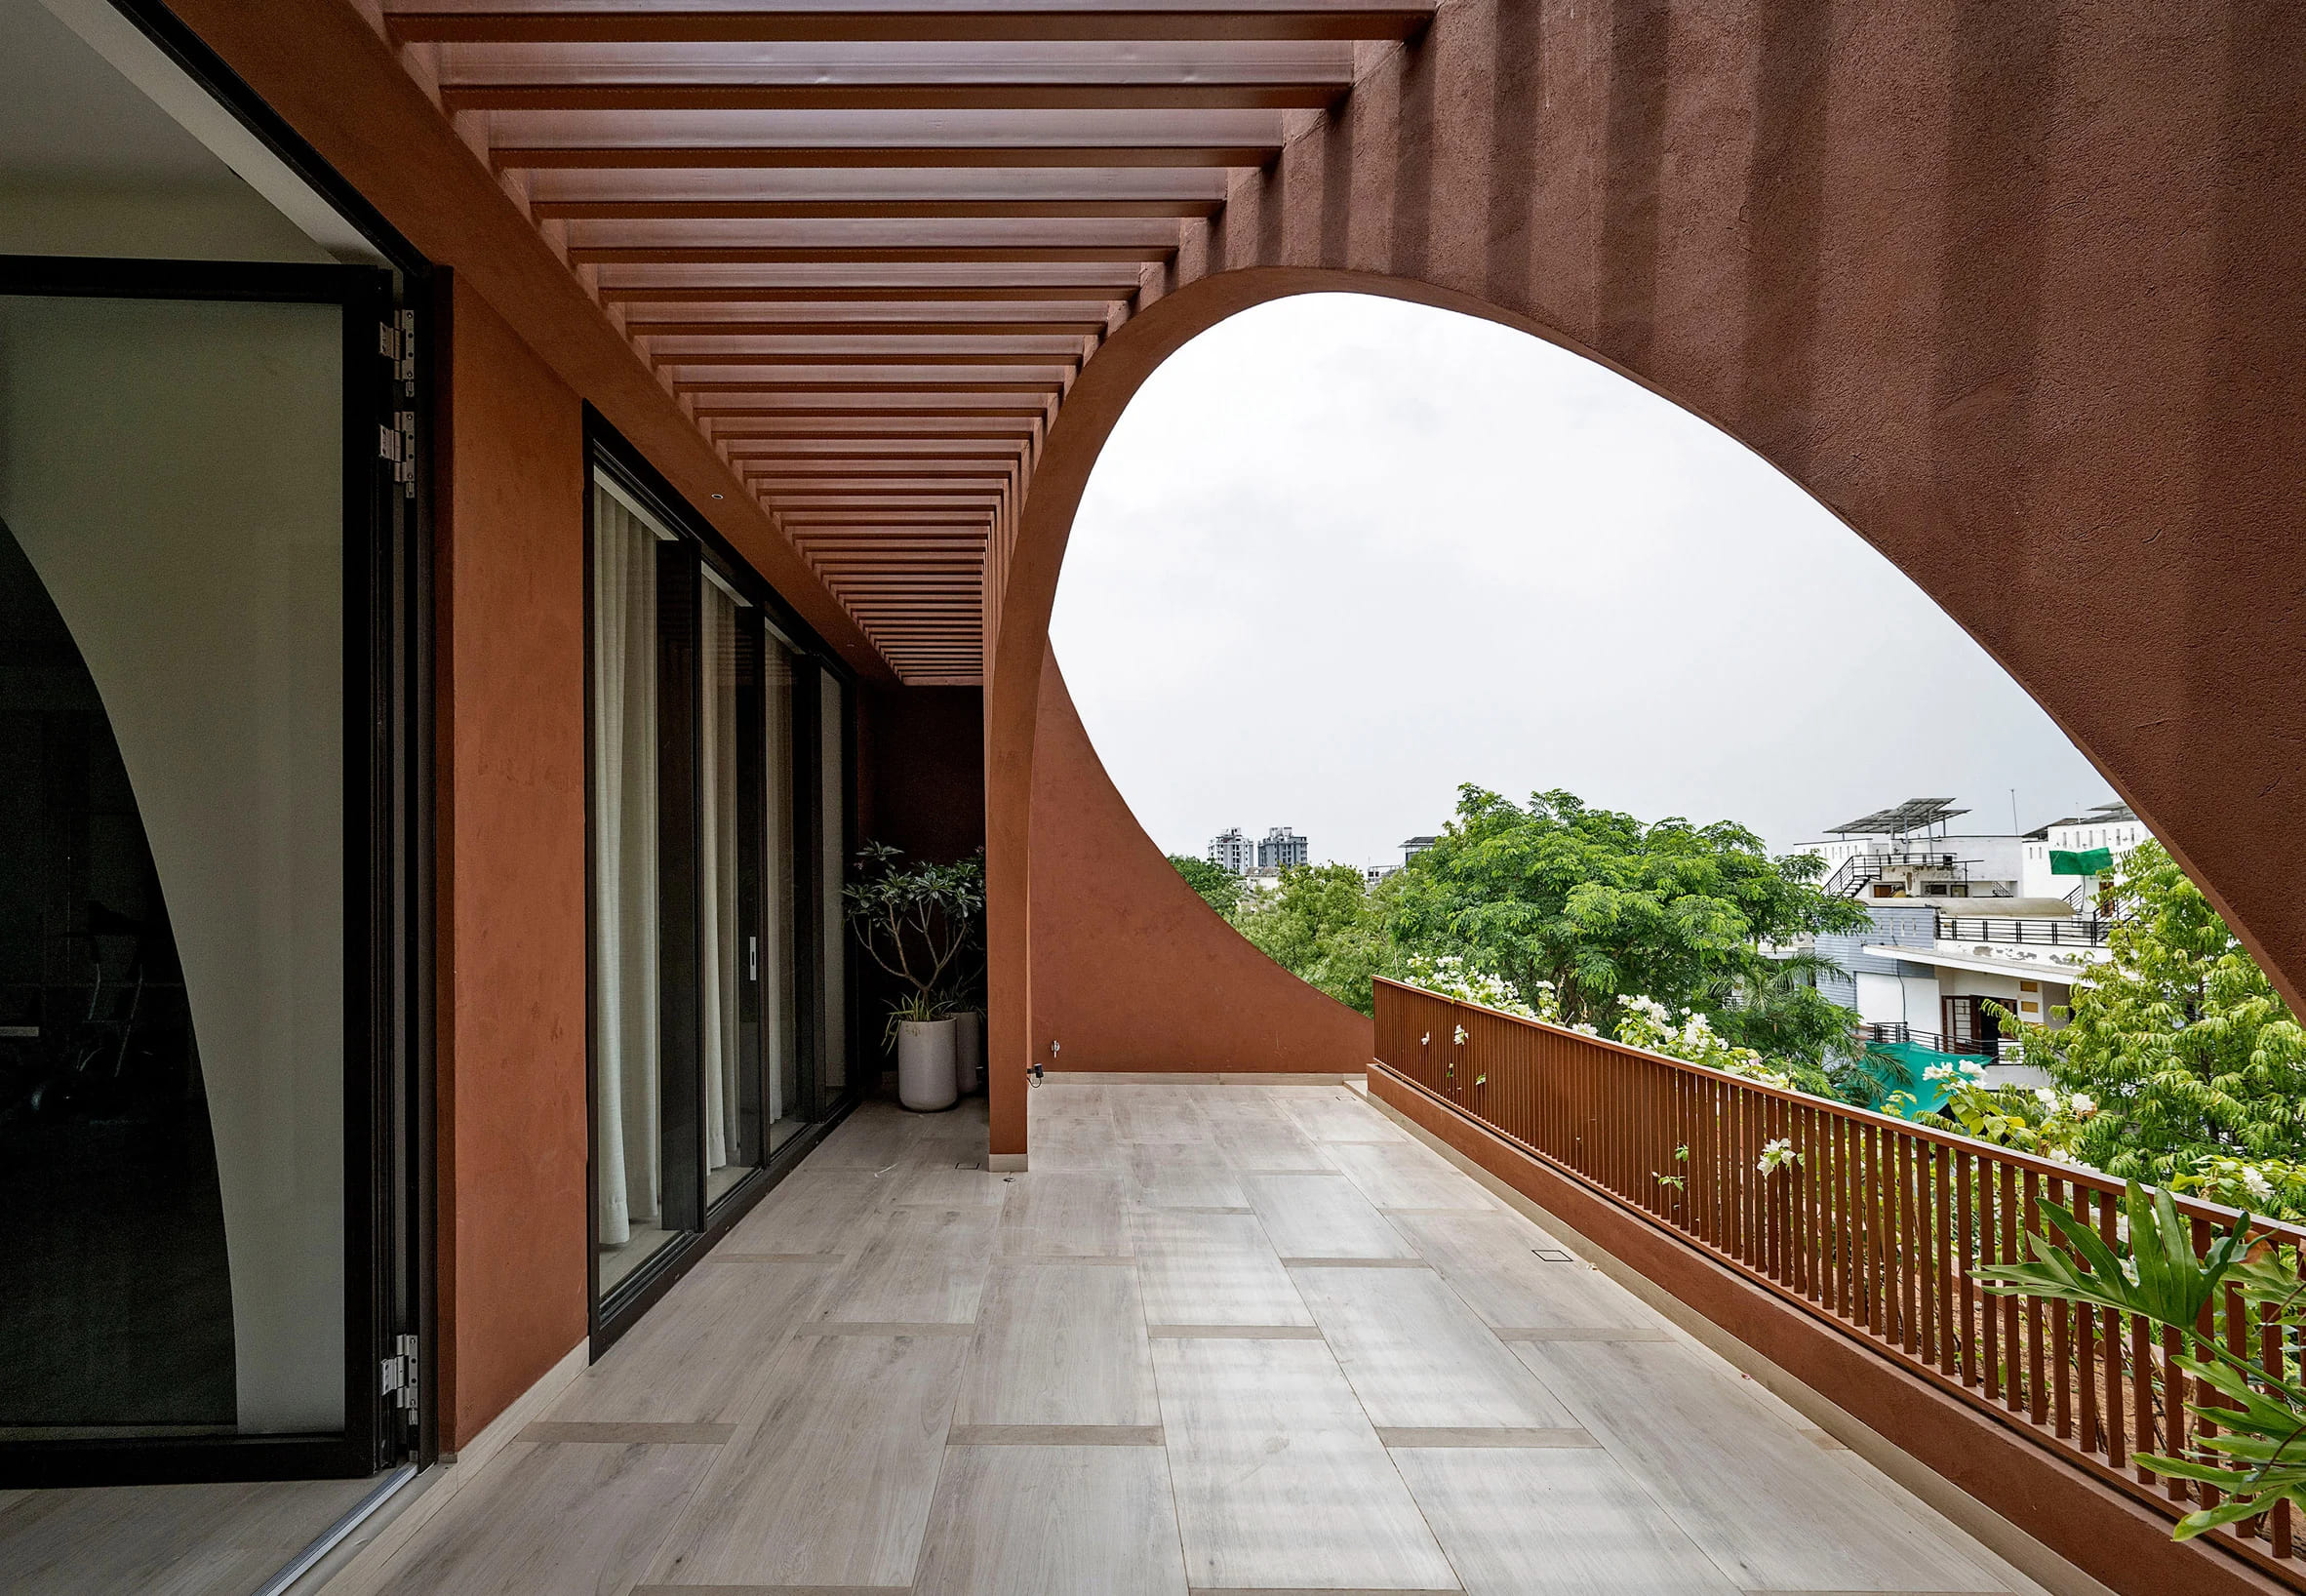 The balcony on the top floor of the house is equipped with a wooden canopy